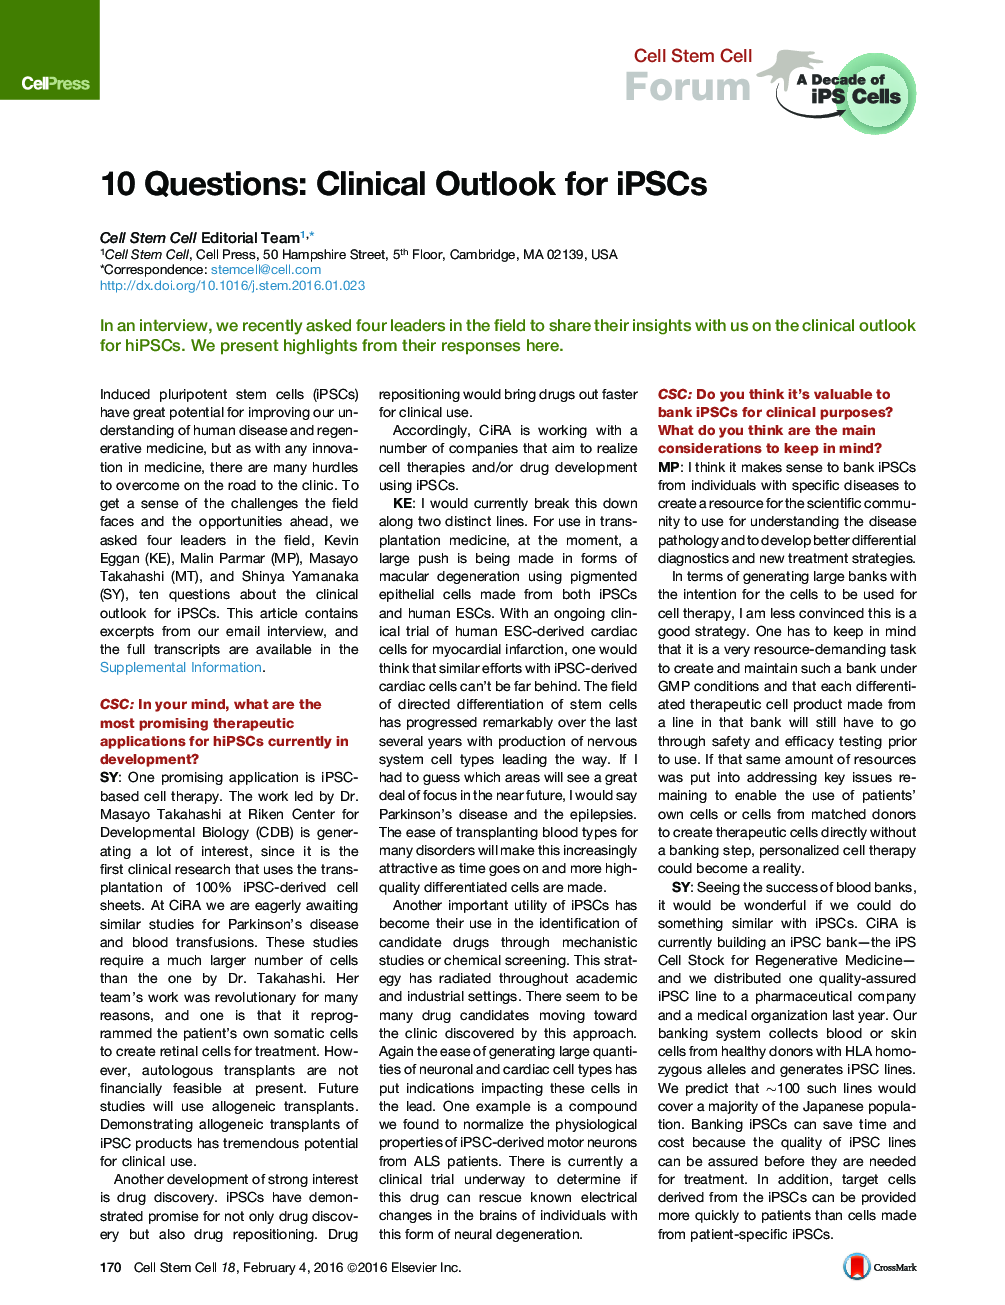 10 Questions: Clinical Outlook for iPSCs